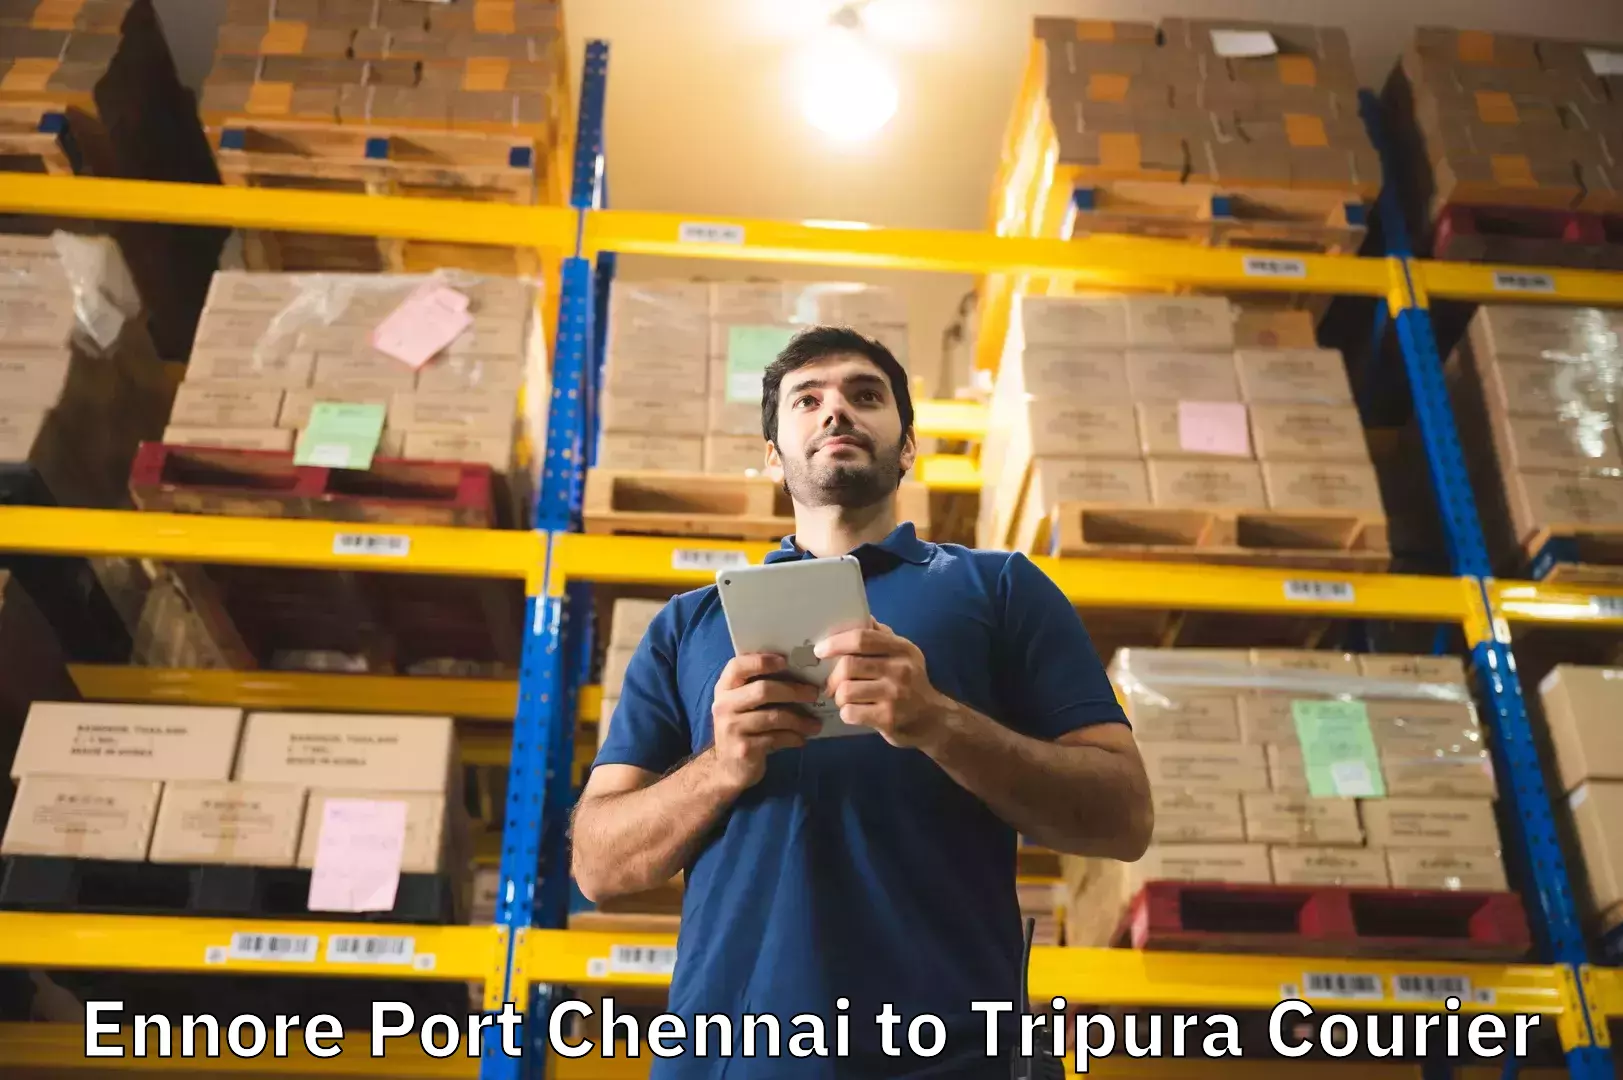 Luggage transport consulting Ennore Port Chennai to Udaipur Tripura